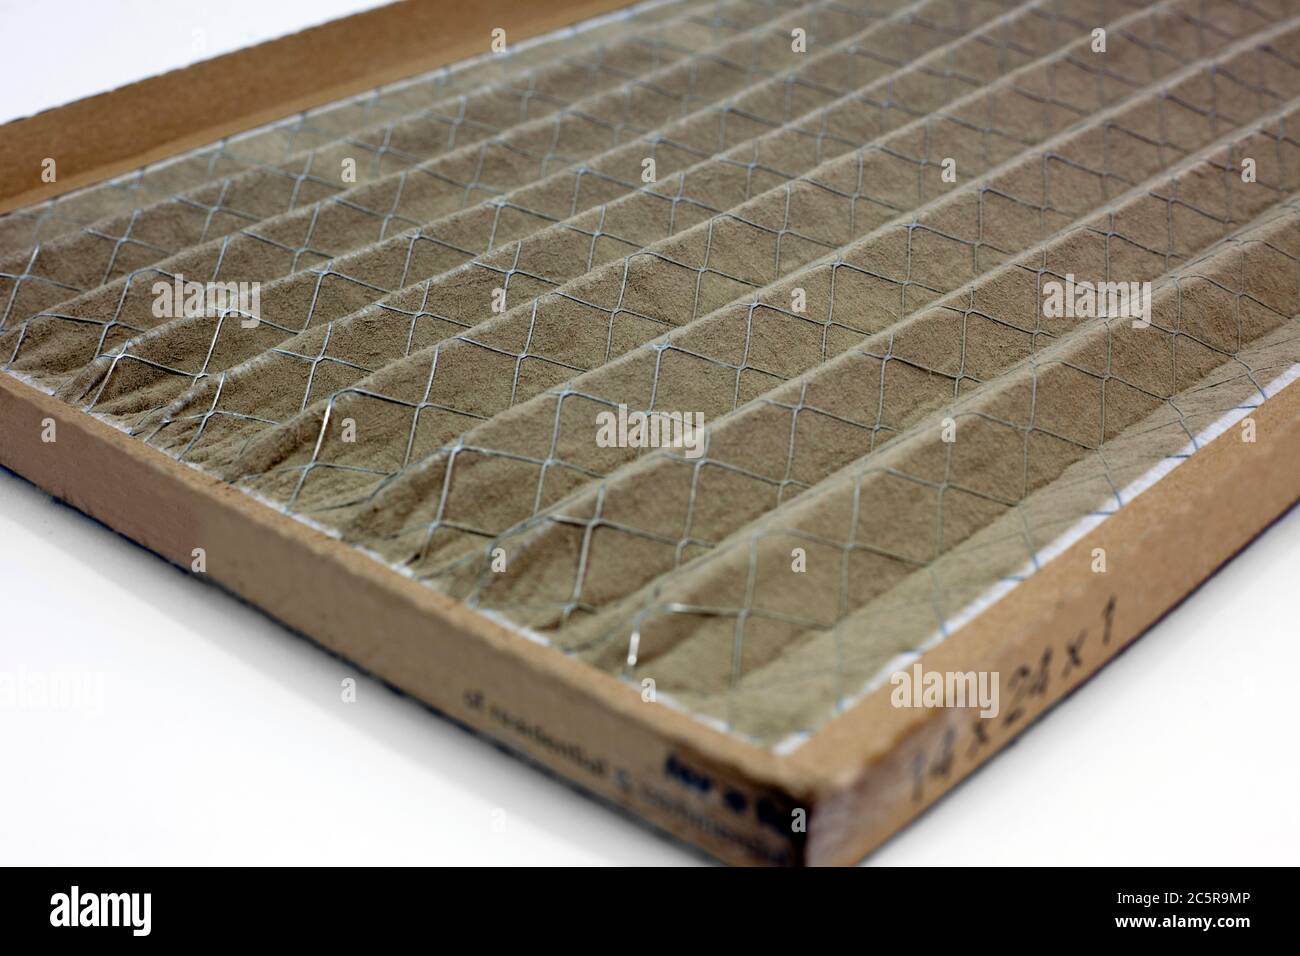 Disgustingly dirty home air conditioner filter. Horizontal. Stock Photo